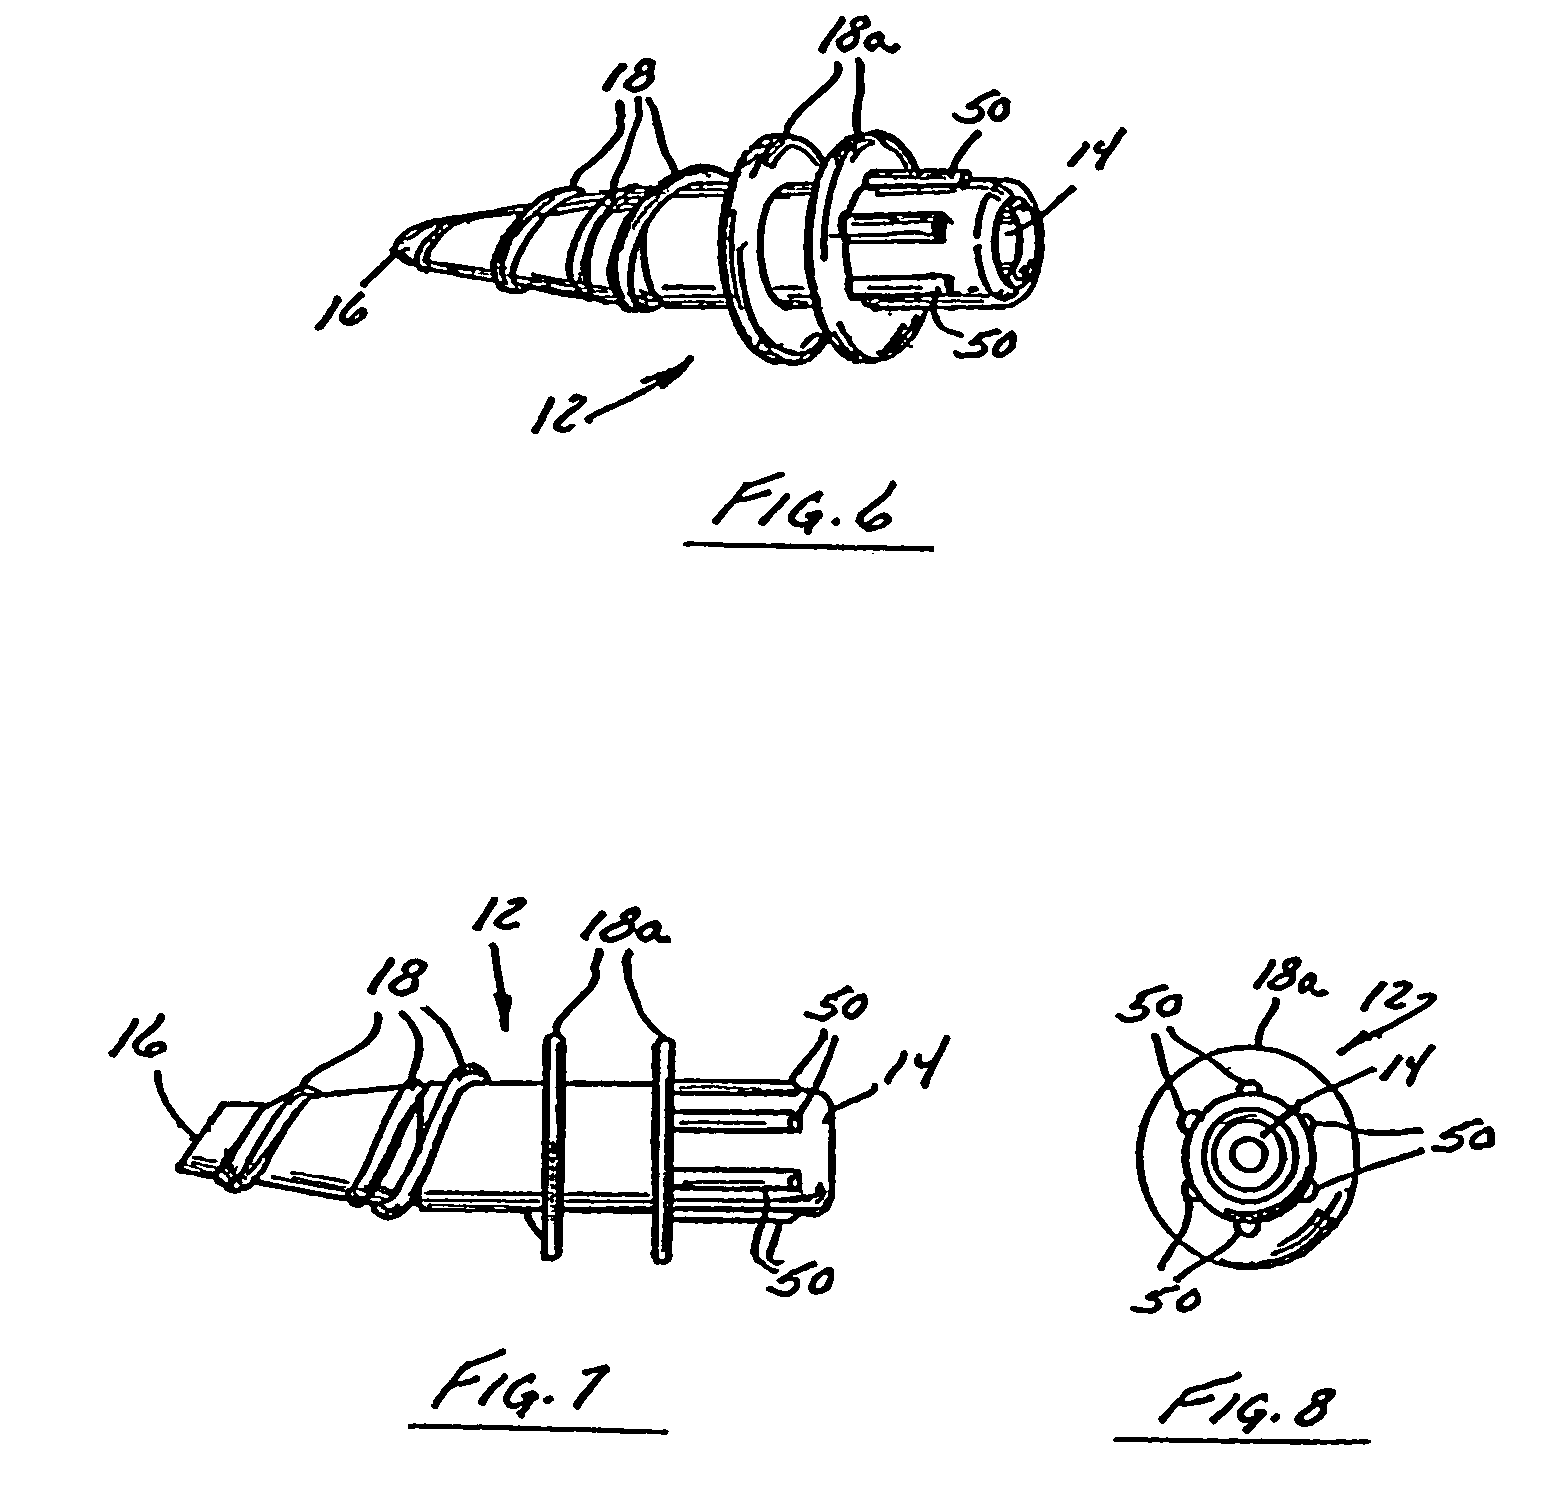 Apparatus for trans-cervical artificial insemination and embryo transfer